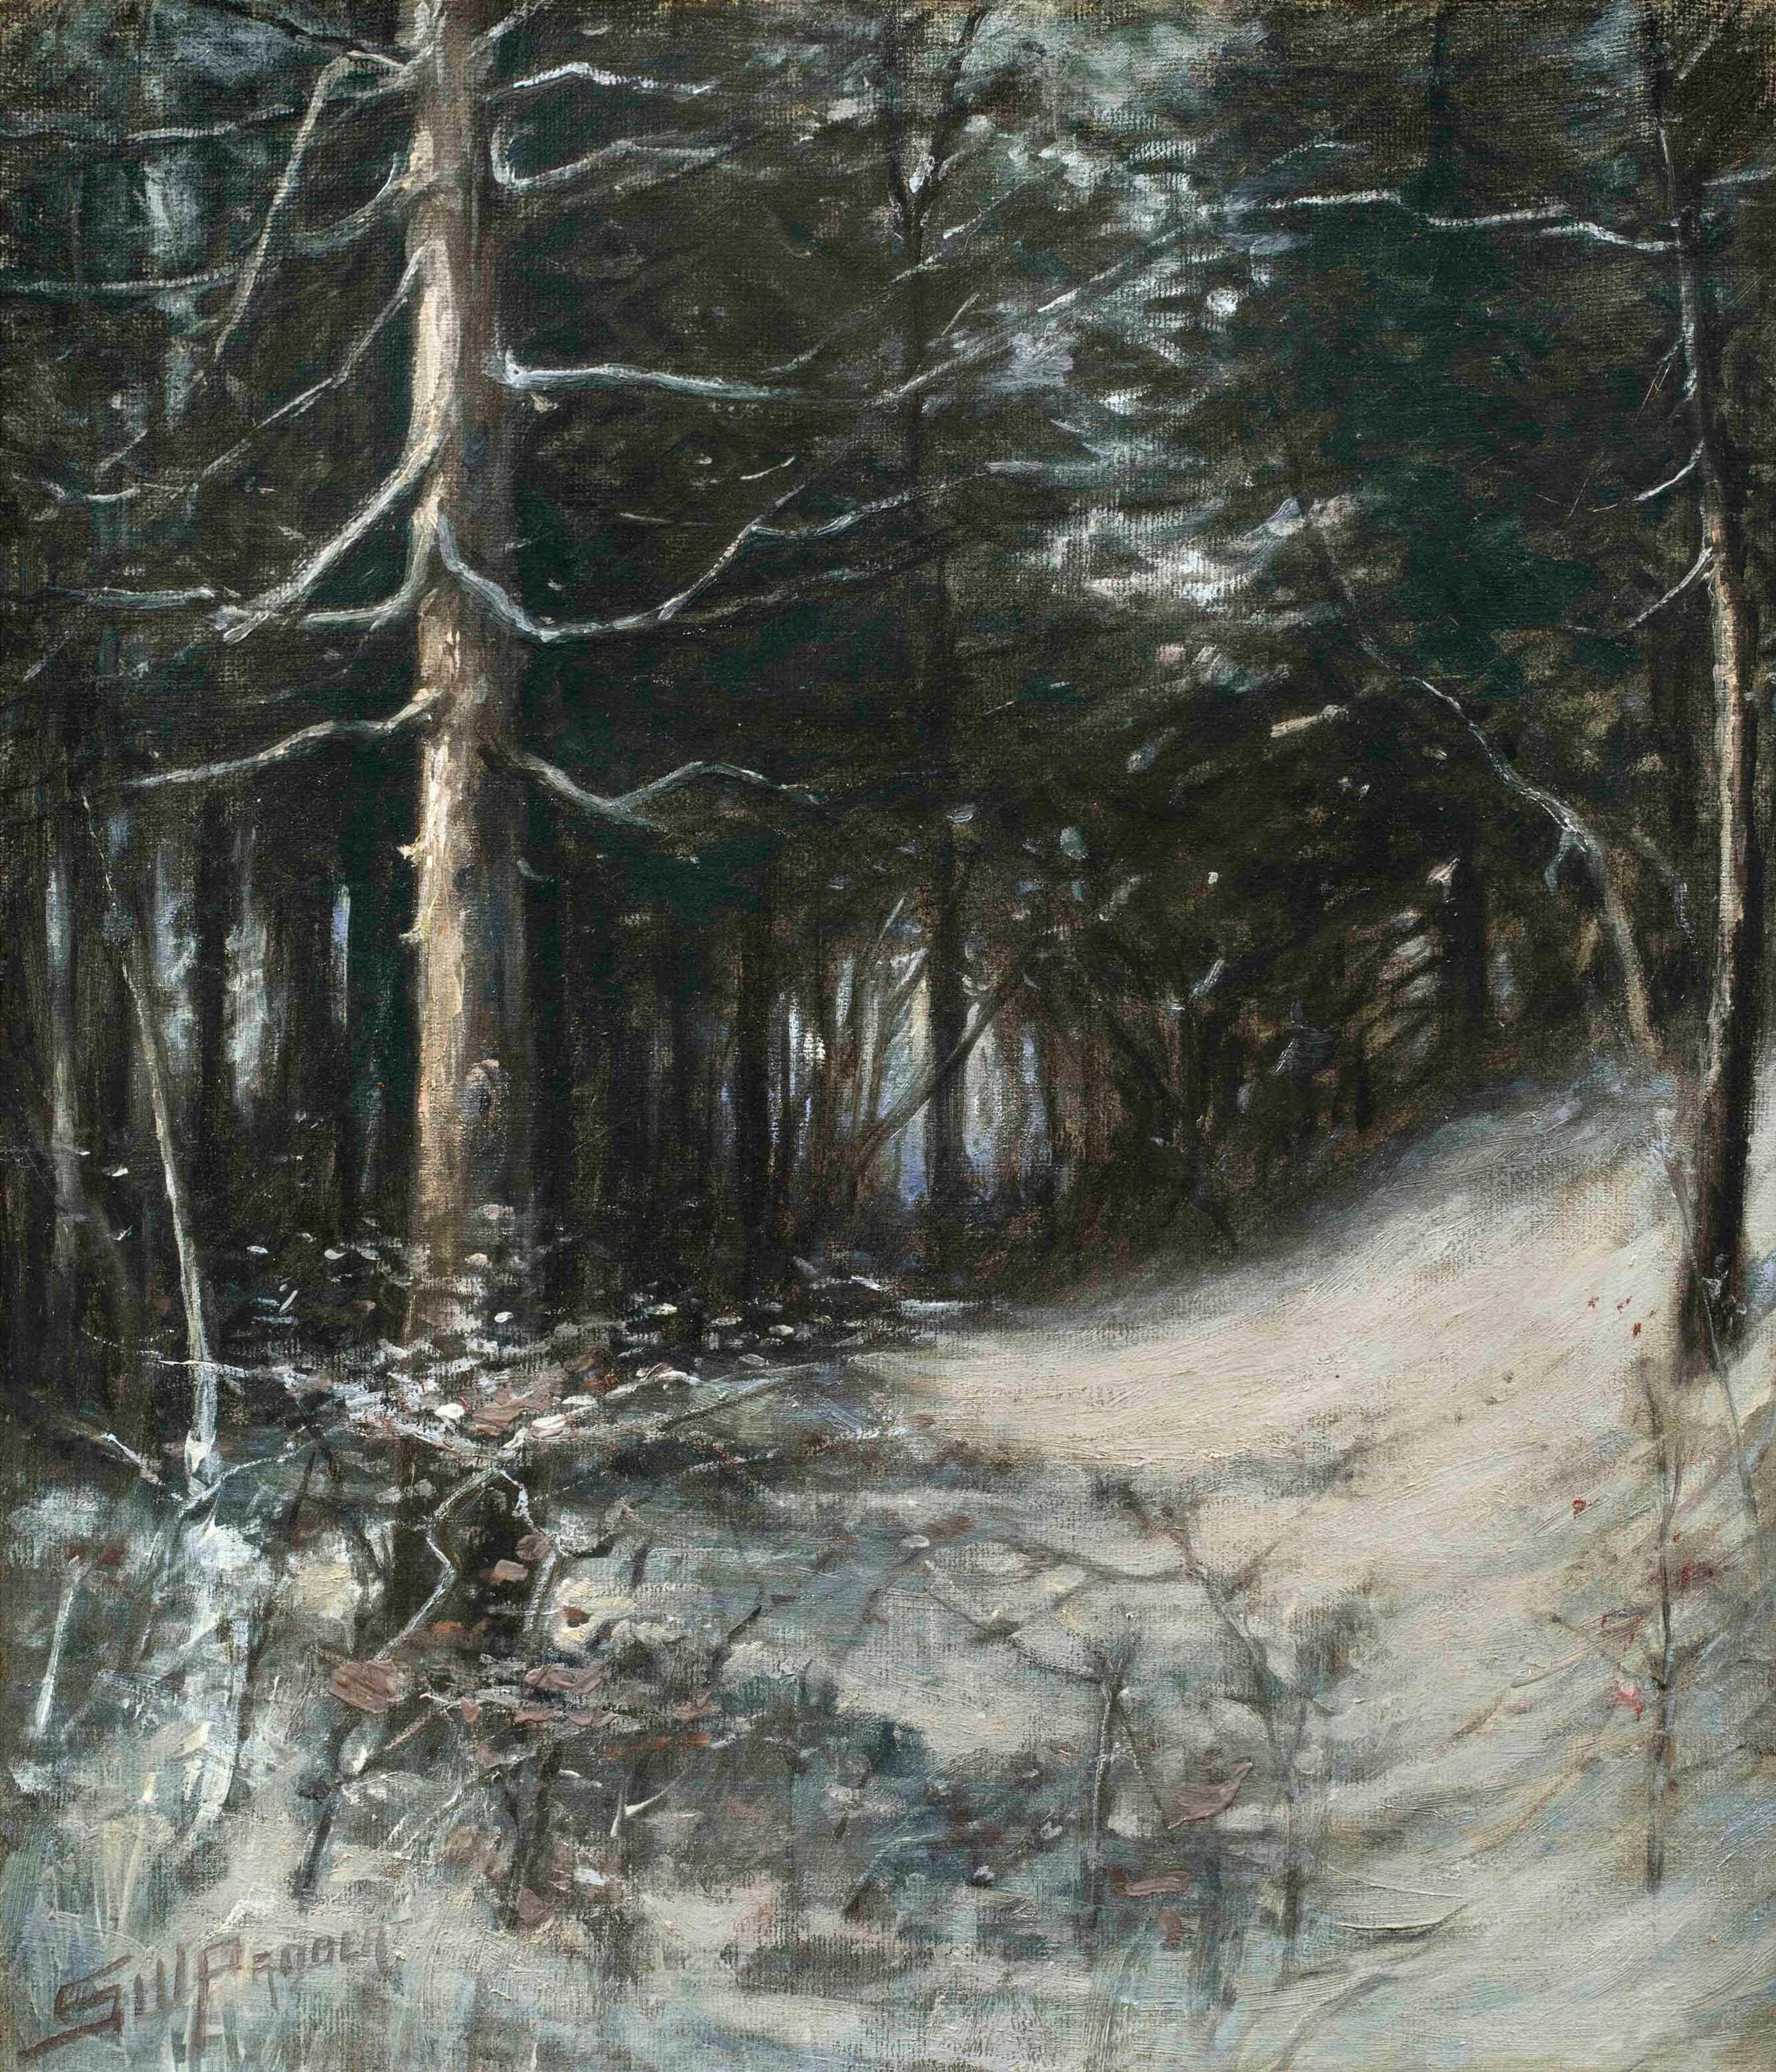 Impressionist snow scene, Winter Forest by Sidney Probert (1865-1919, American)

Sidney Probert (1865-1919)
Winter Forest
Oil on canvas
14 x 12 inches
Signed lower left






